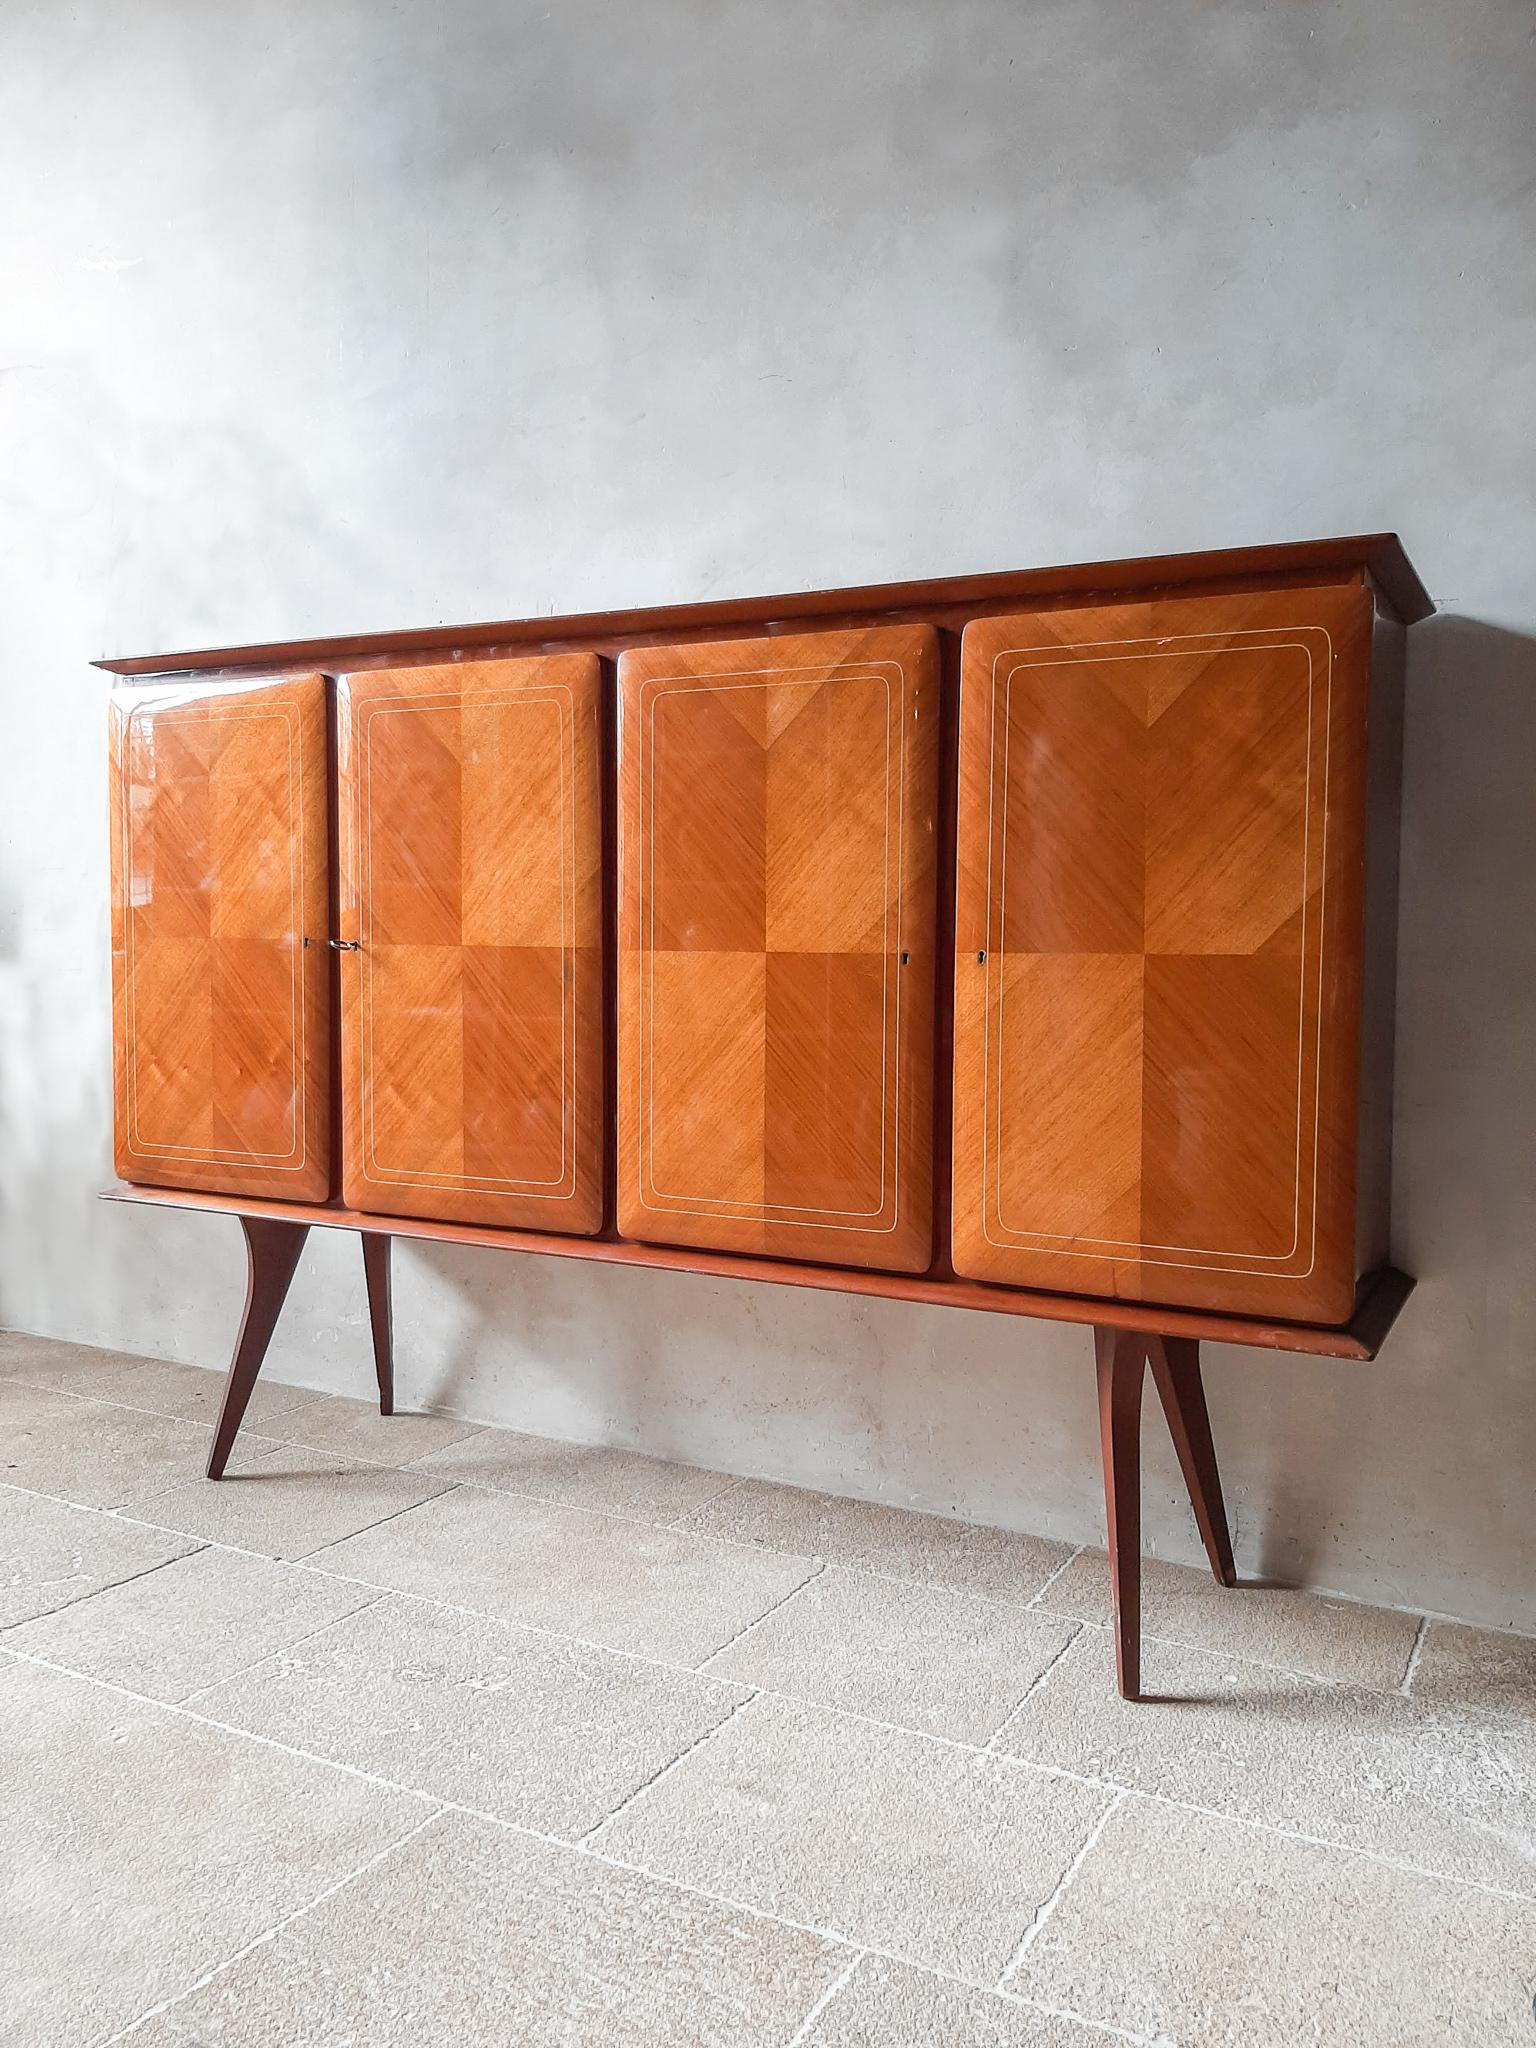 Italian vintage Paolo Buffa style sideboard from the 1950s. A mid-century high credenza or higboard in massive walnut and applied walnut veneer. The two double doors have an open leaf pattern and resin inlay, they open with the key. With internal